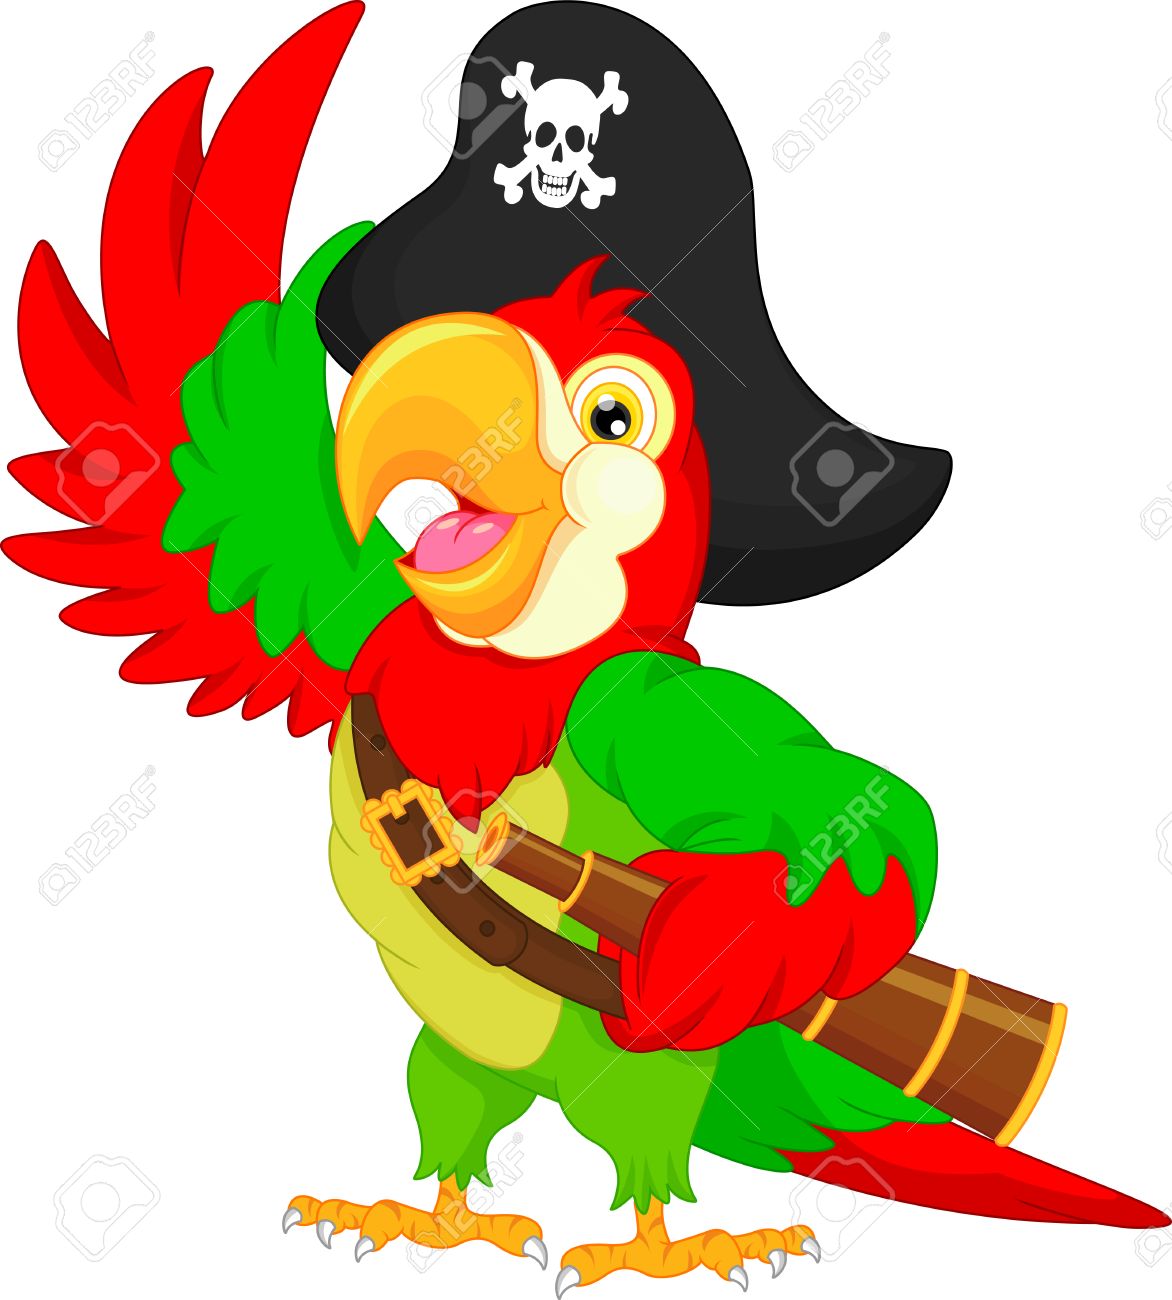 Pirate parrot clipart 2 » Clipart Station.